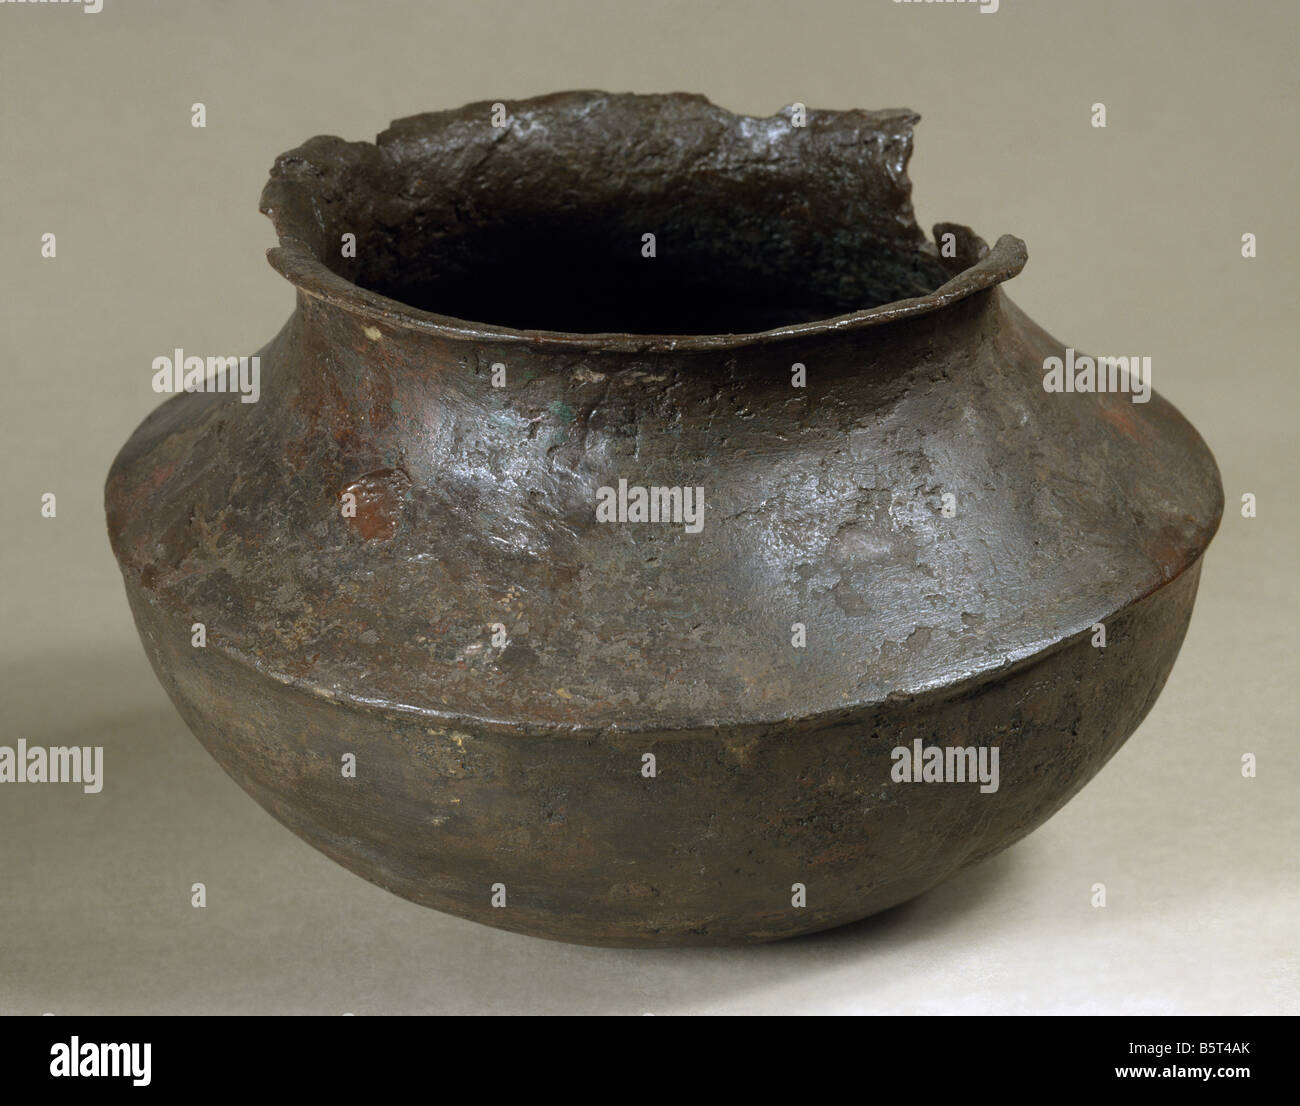 Cooking pot from the Indus Valley civilisation National Museum of New Delhi ref#13303/0/2675India8670/1912hp.3140/27 Stock Photo